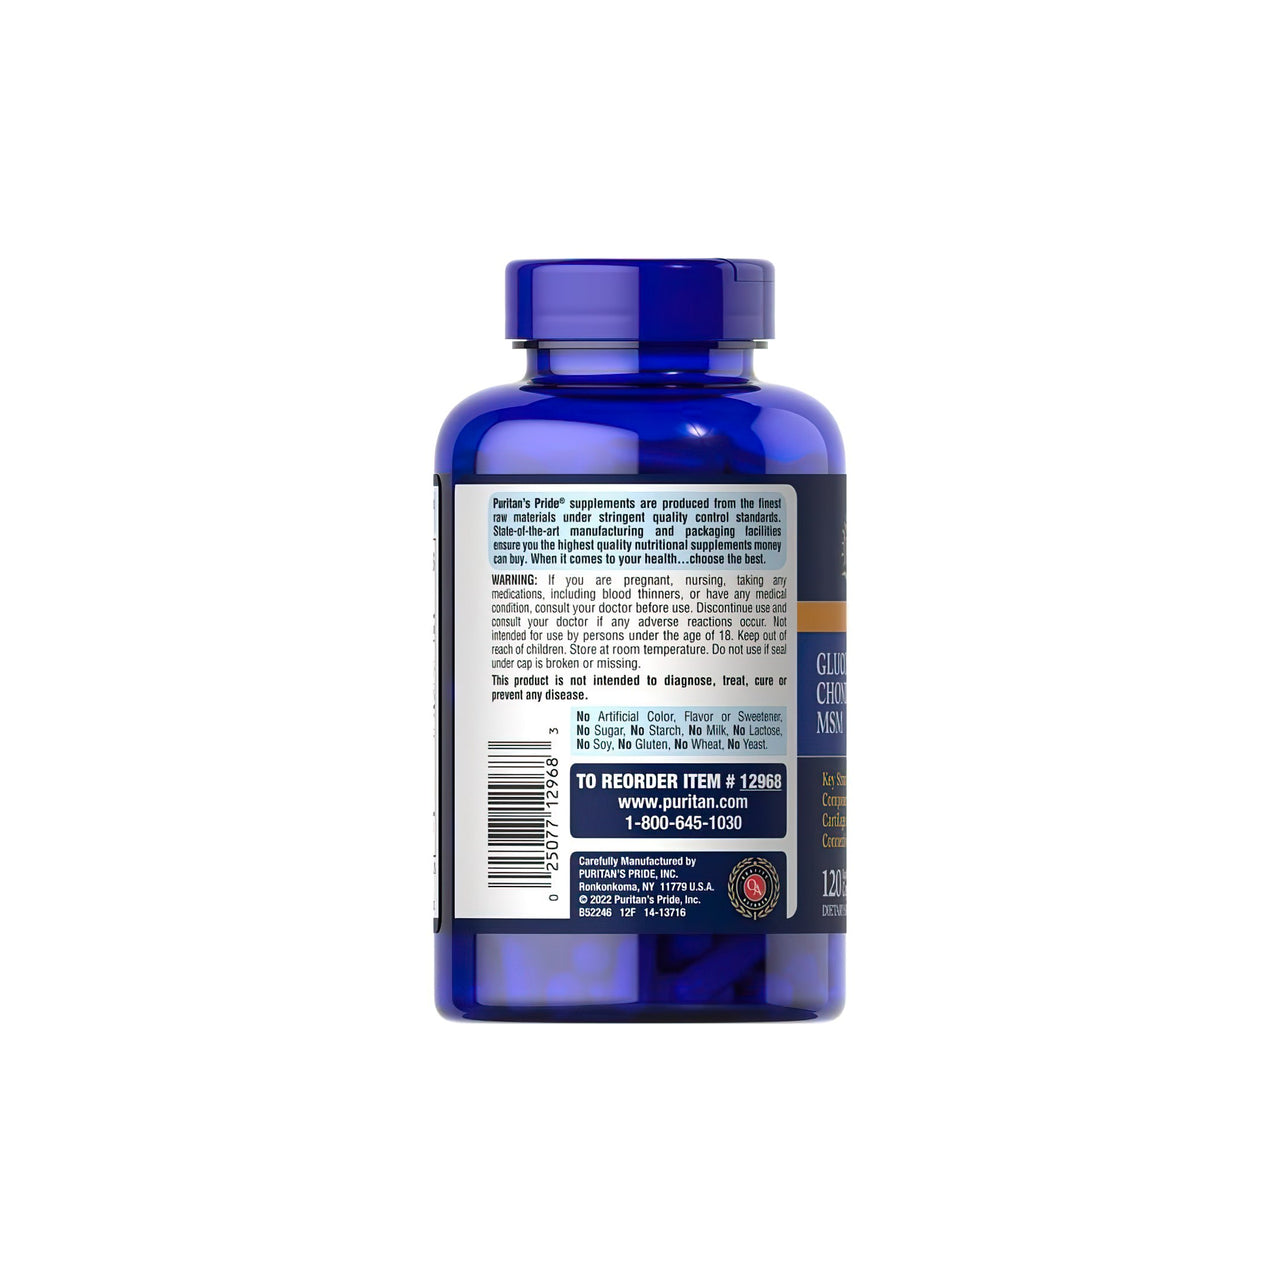 The back of a bottle of Puritan's Pride Glucosamine Chondroitin MSM 120 capsules.